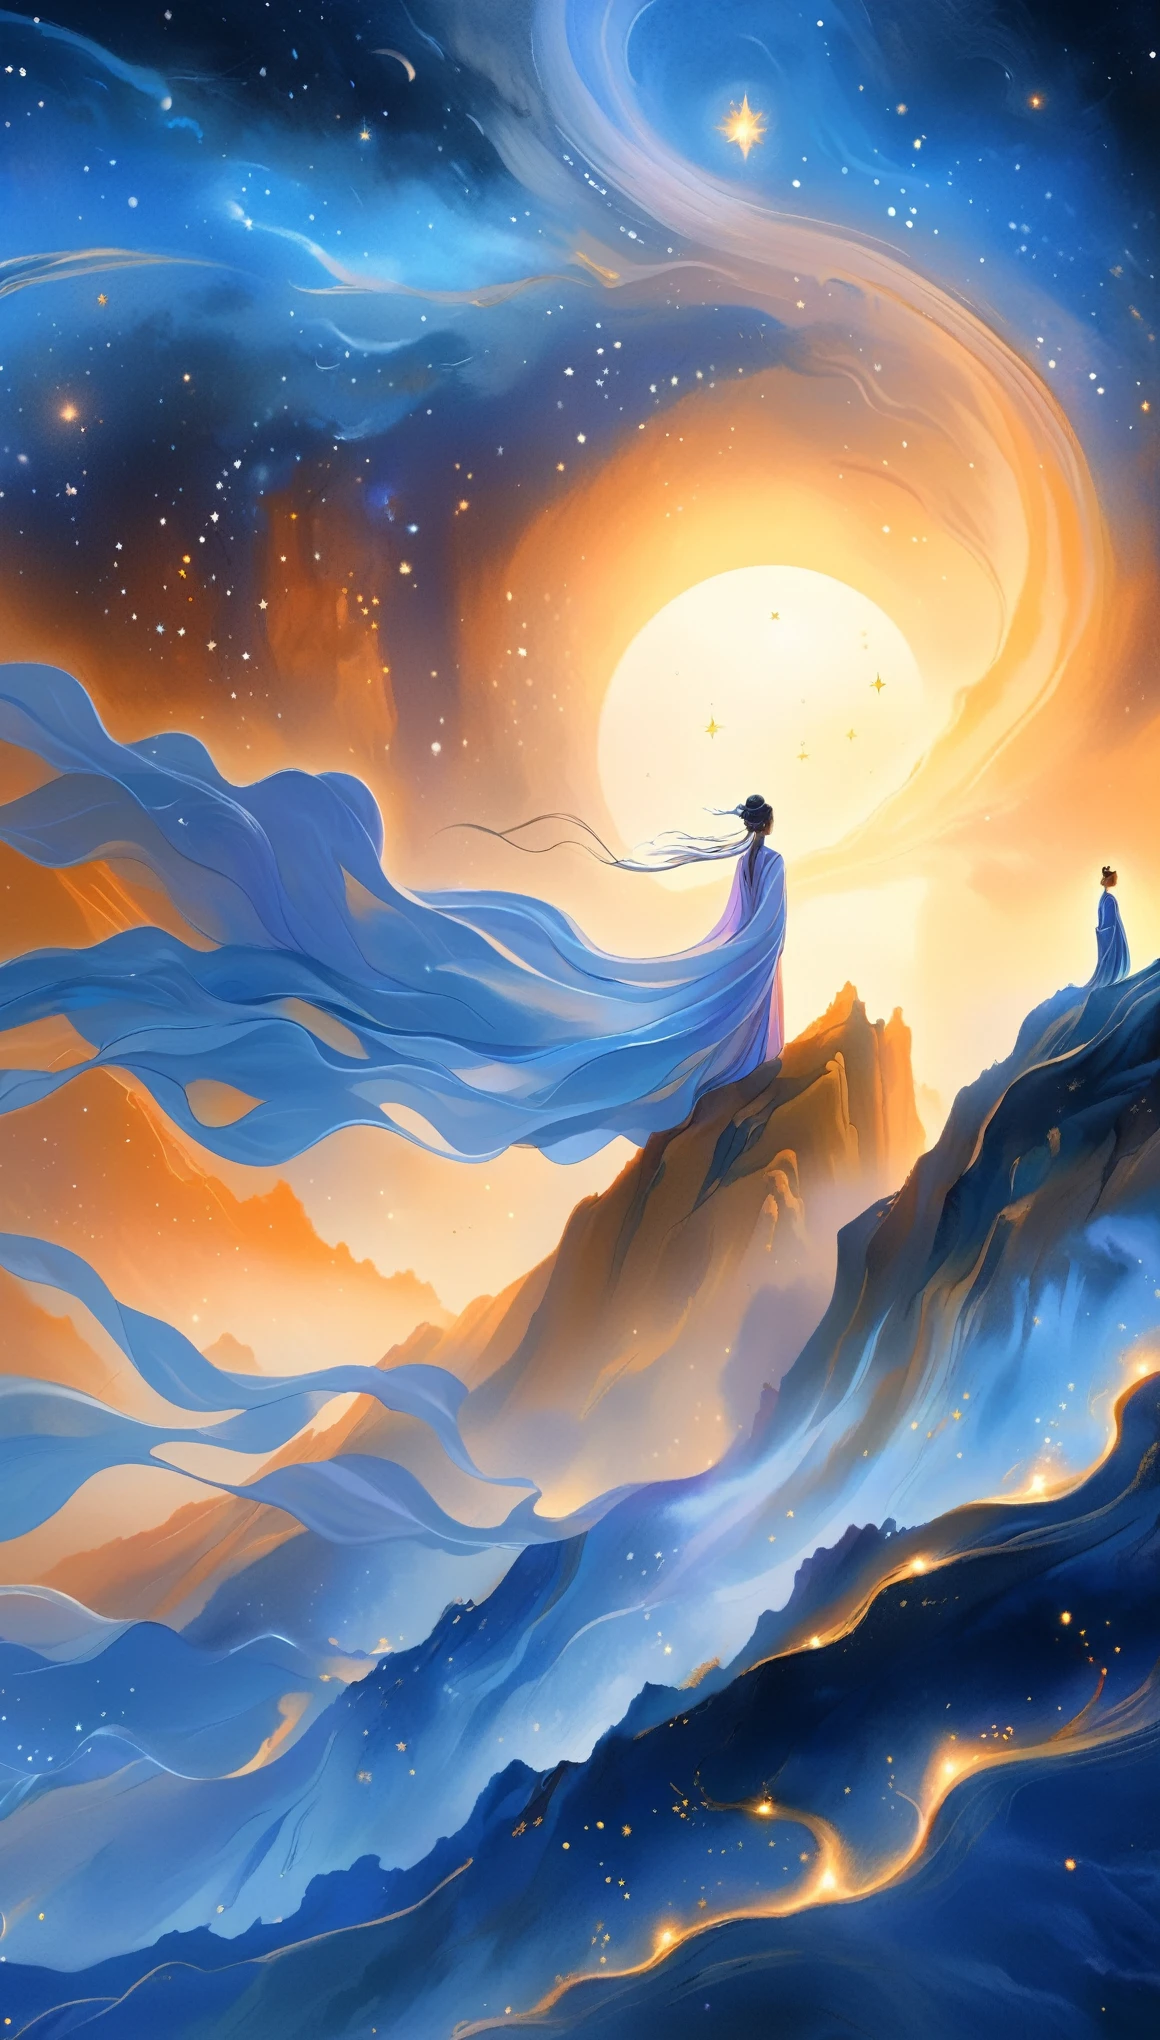 A beautiful woman stands on a cliff looking at the stars, （beautiful silhouette），Surrounded by a vortex of cosmic energy，shrouded in dreamy mist。Figure wrapped in flowing robe.，elegant，Light，Integrate with the flow of heaven and earth。The sky is a tapestry of deep purples and blues，starlight embellishment，The landscape below suggests softness、rolling mountains，Astral ethereal, fantastic numbers, ethereal essence, Ethereal fantasy, Ethereal Beauty, Digital Art Fantasy, beautiful fantasy painting, Beautiful fantasy art, stunning fantasy art, Inspired by Cyril Rolando (Cyril Rolando), Fantasy art style, Gently rotating magical energy, Fantasy Numbers, Fantasy NumbersArt, Empty Spirit, of Ethereal fantasy，Artistic beauty，Gold lines。Tracing gold。